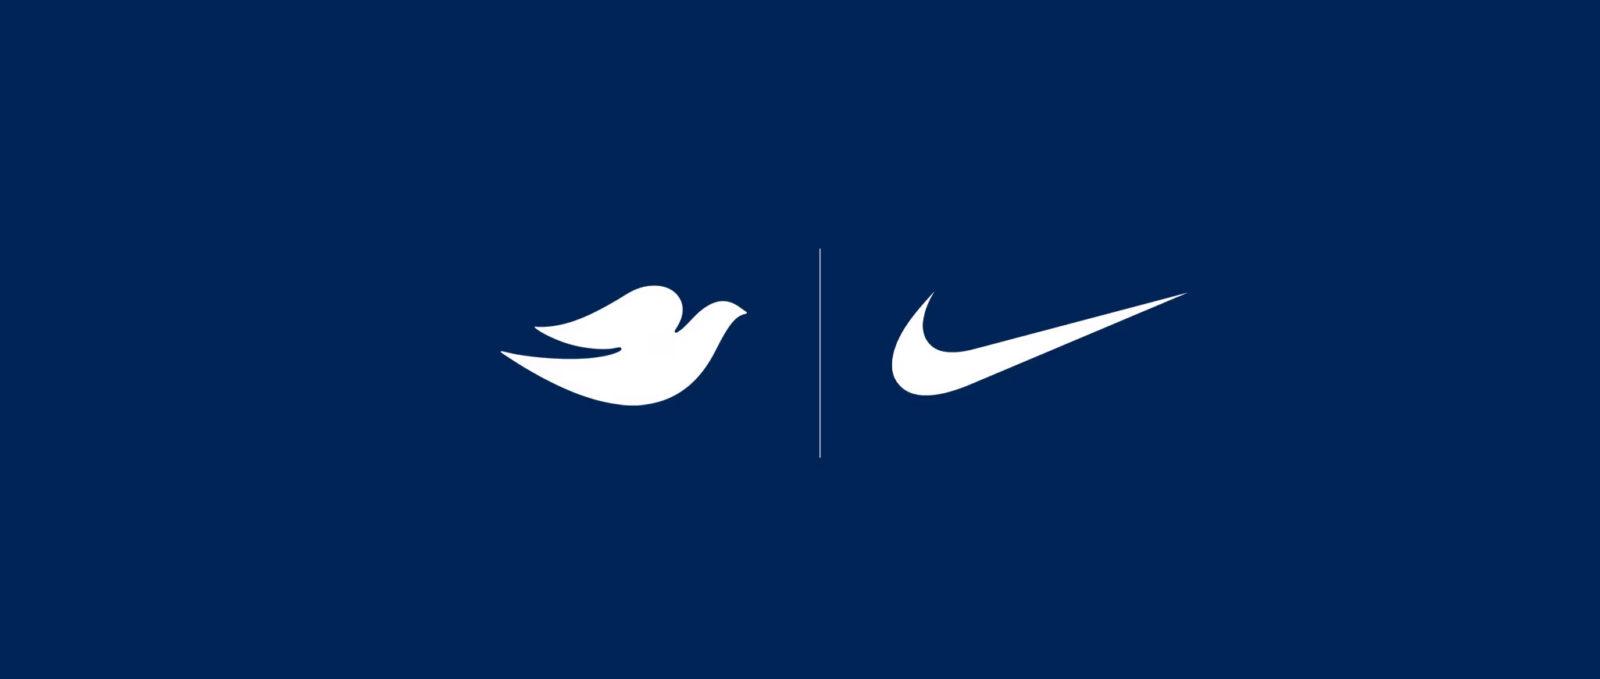 What Marketers Can Learn From The Dove And Nike Partnership